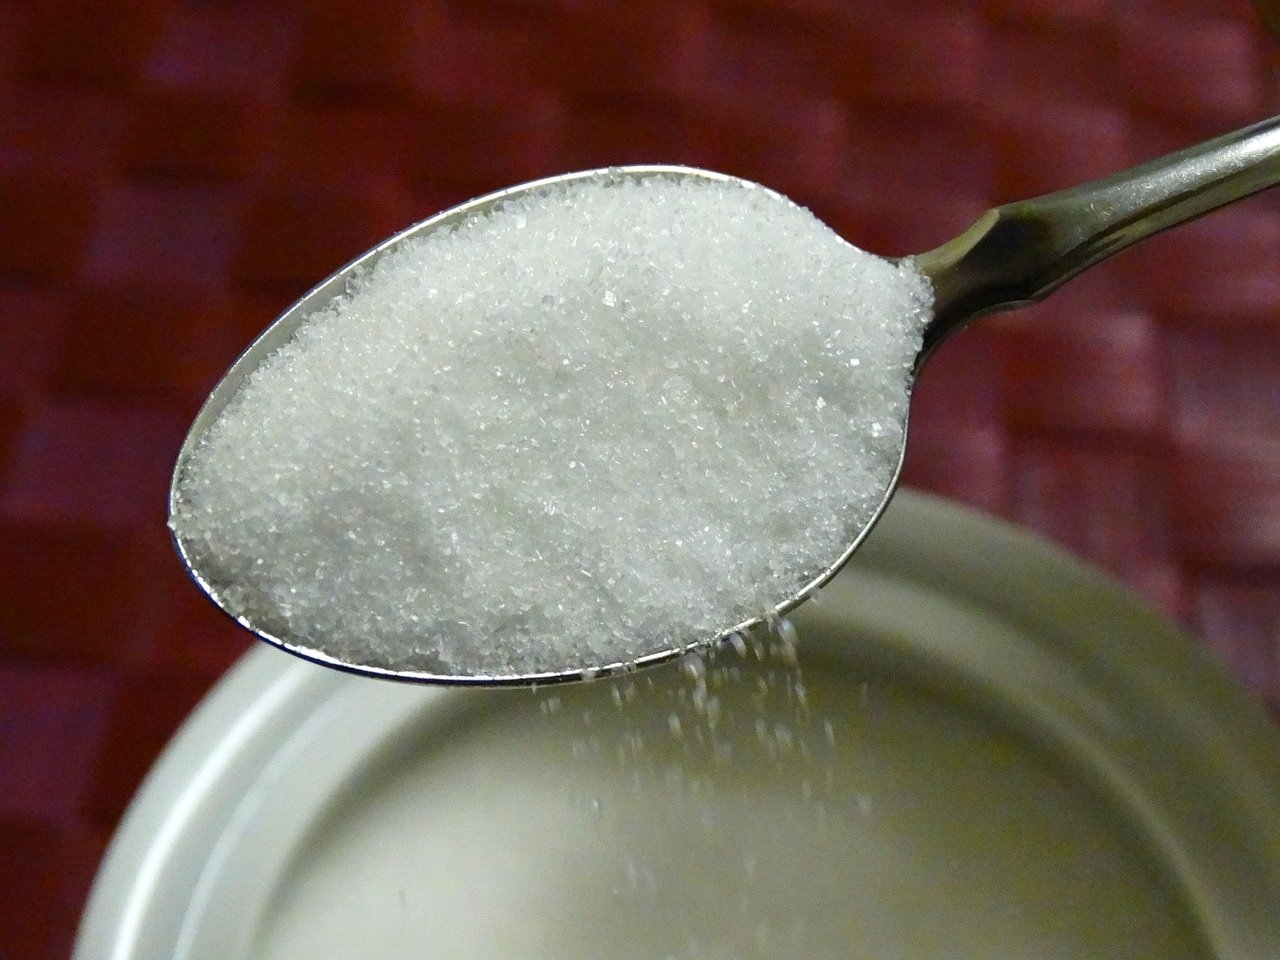 New Study about Sugar vs. Calorie-free Sweeteners